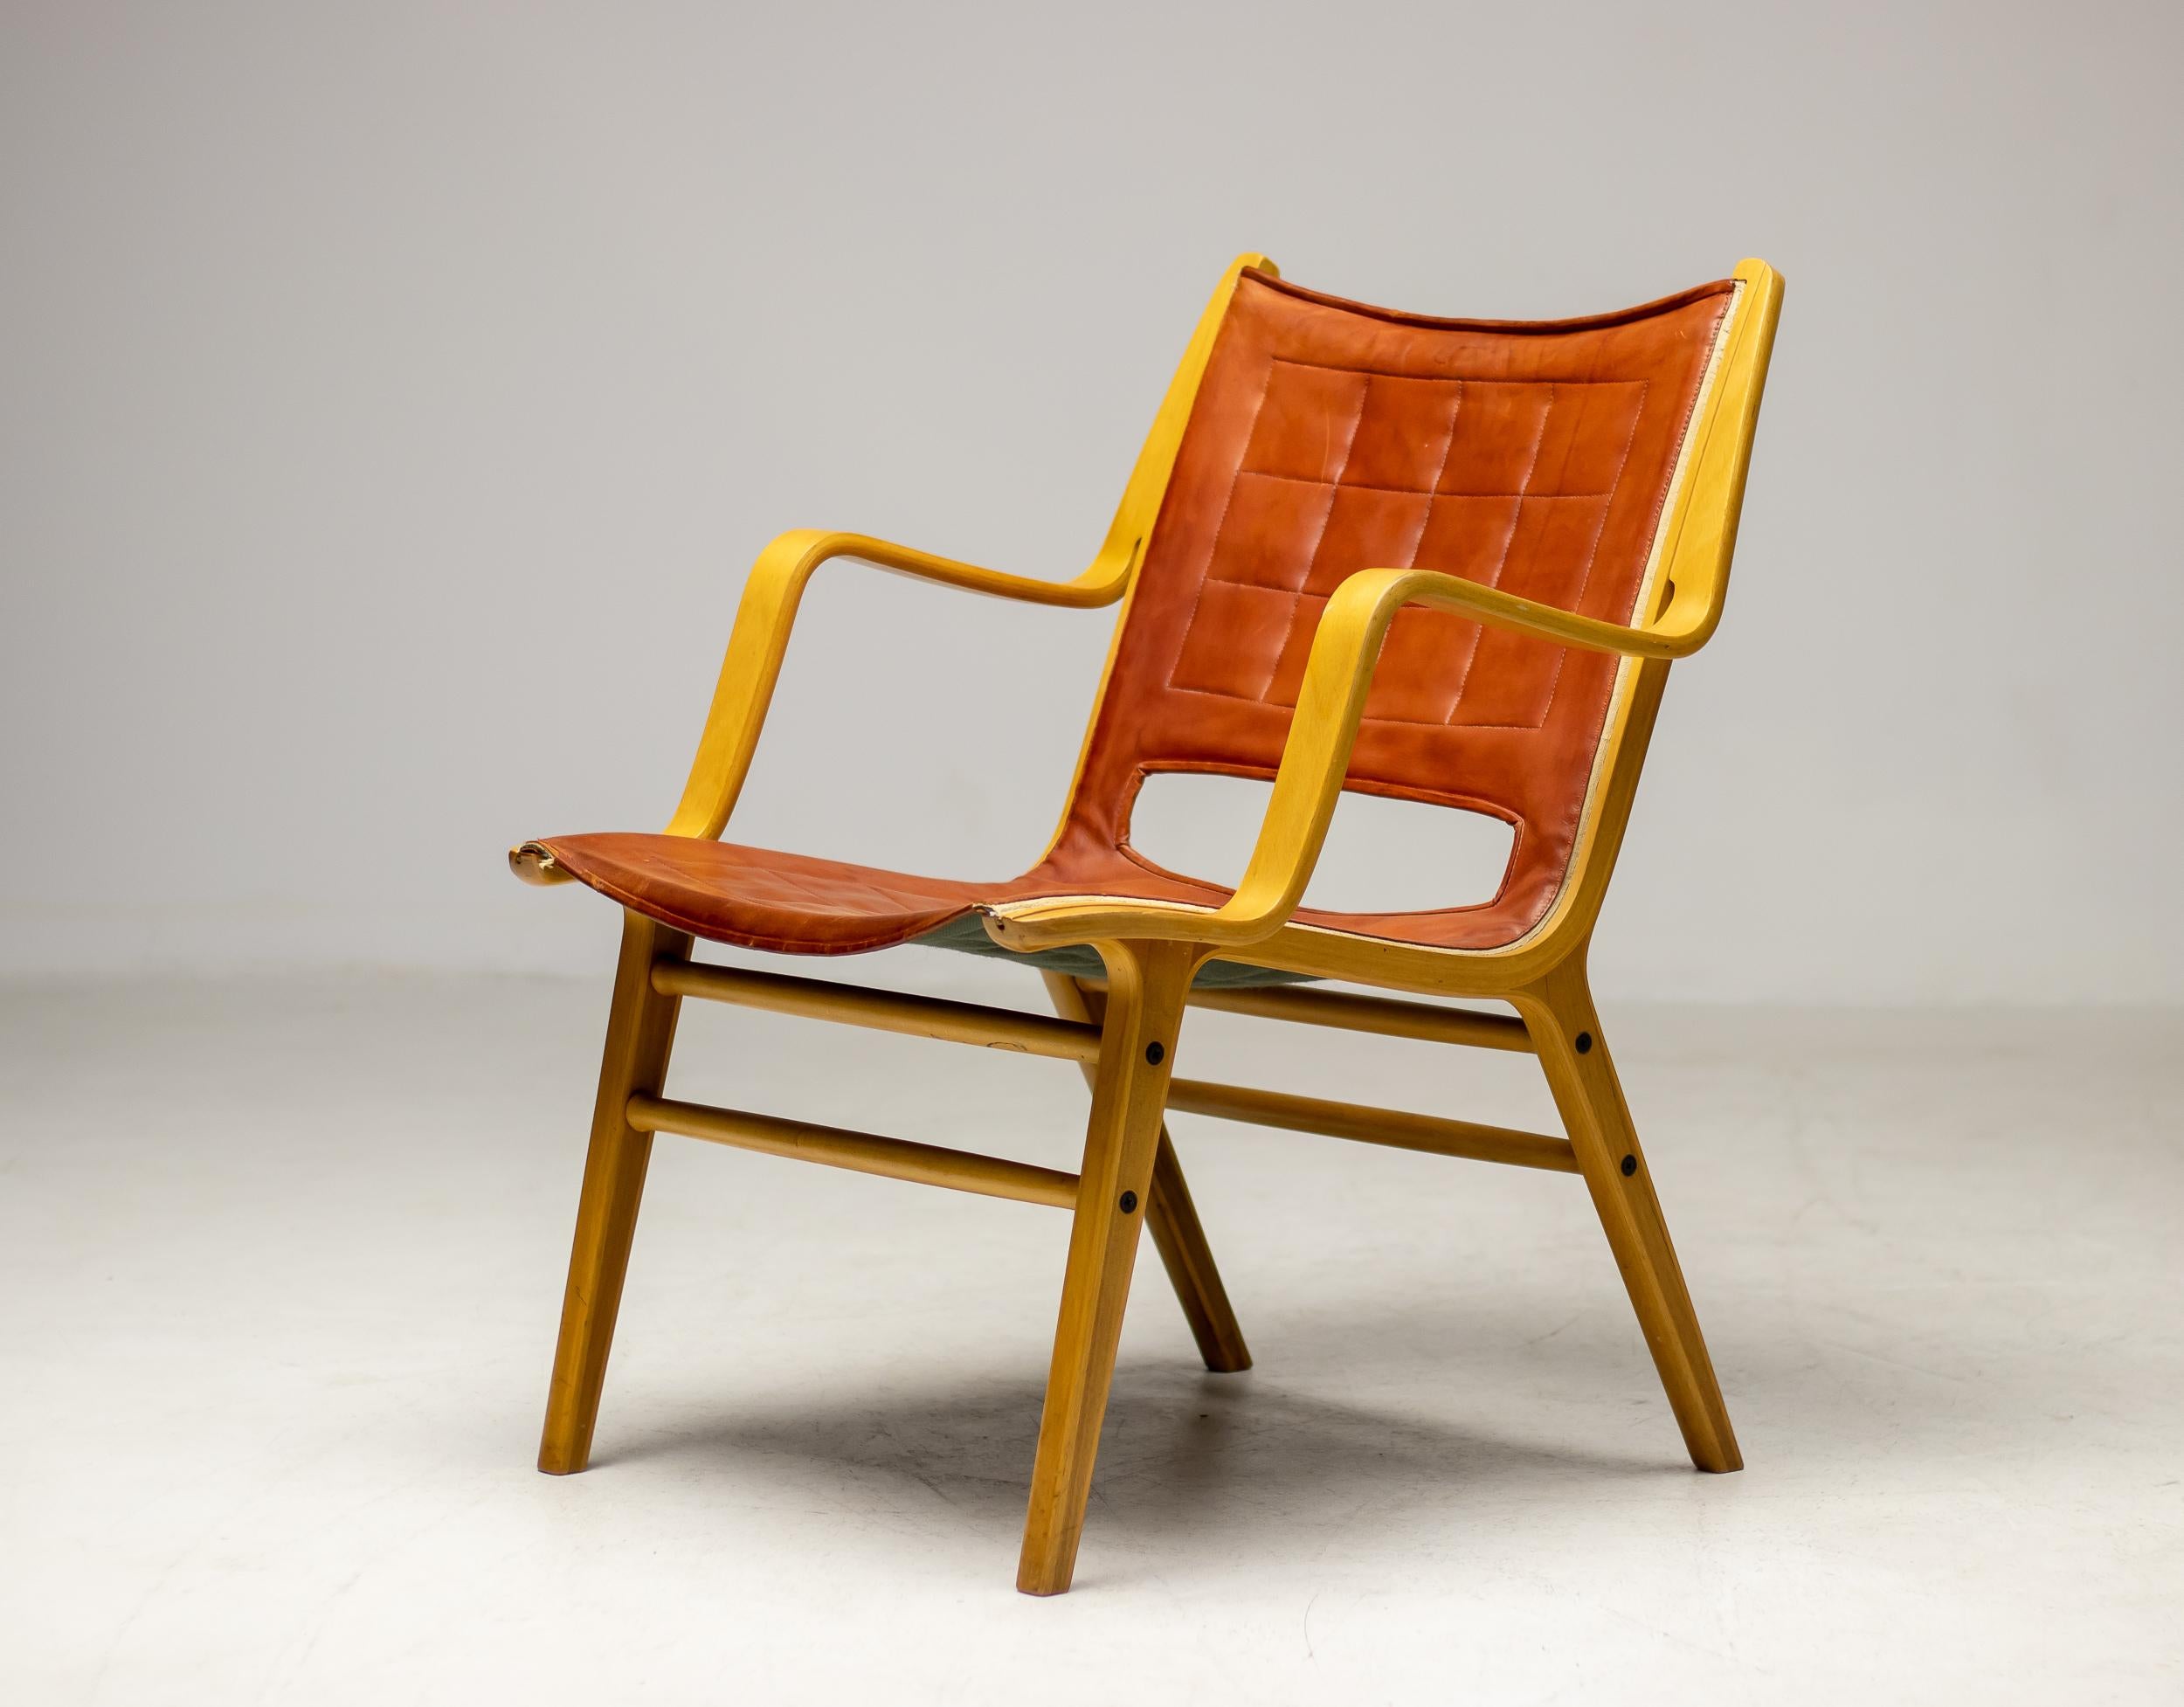 Armchair designed by Peter Hvidt and Orla Mølgaard–Nielsen and produced in 1963 by Fritz Hansen, Denmark.  The chair is press shaped in laminated beechwood, the seat is upholstered with all original cognac leather. The legs feature a teak core.